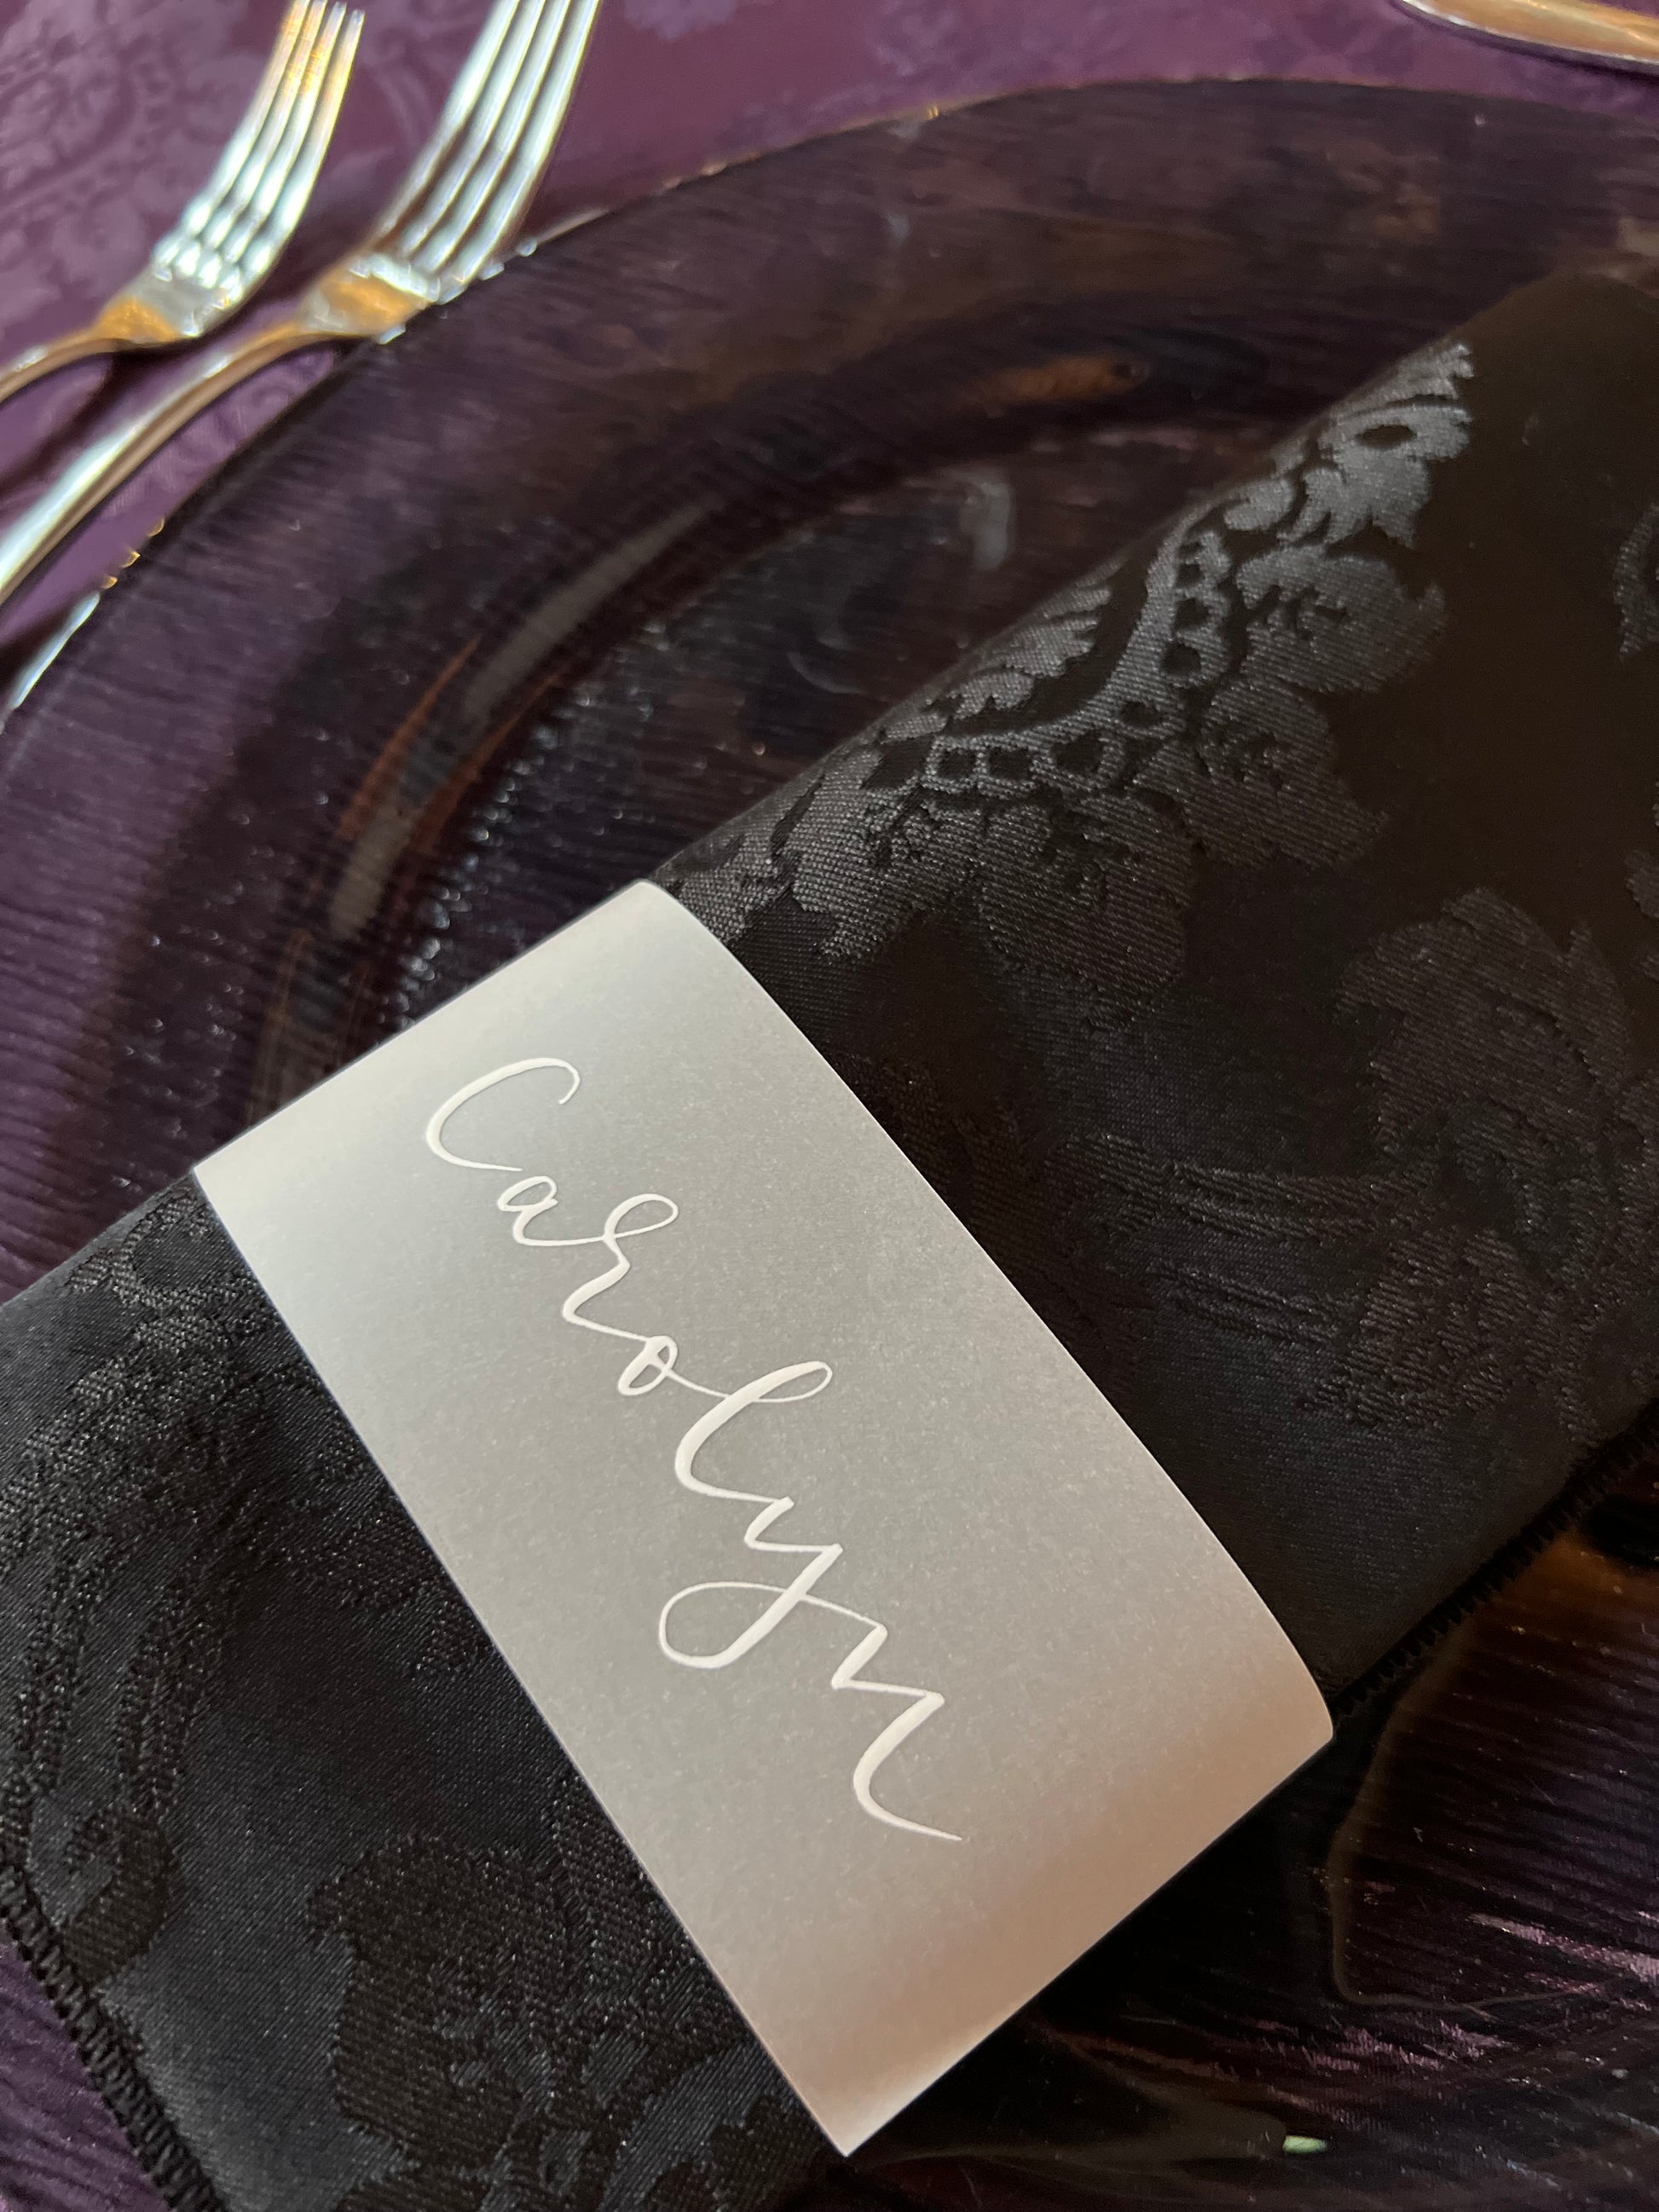 white ink calligraphy reading Carolyn, on vellum paper band which is then wrapped around a black damask napkin